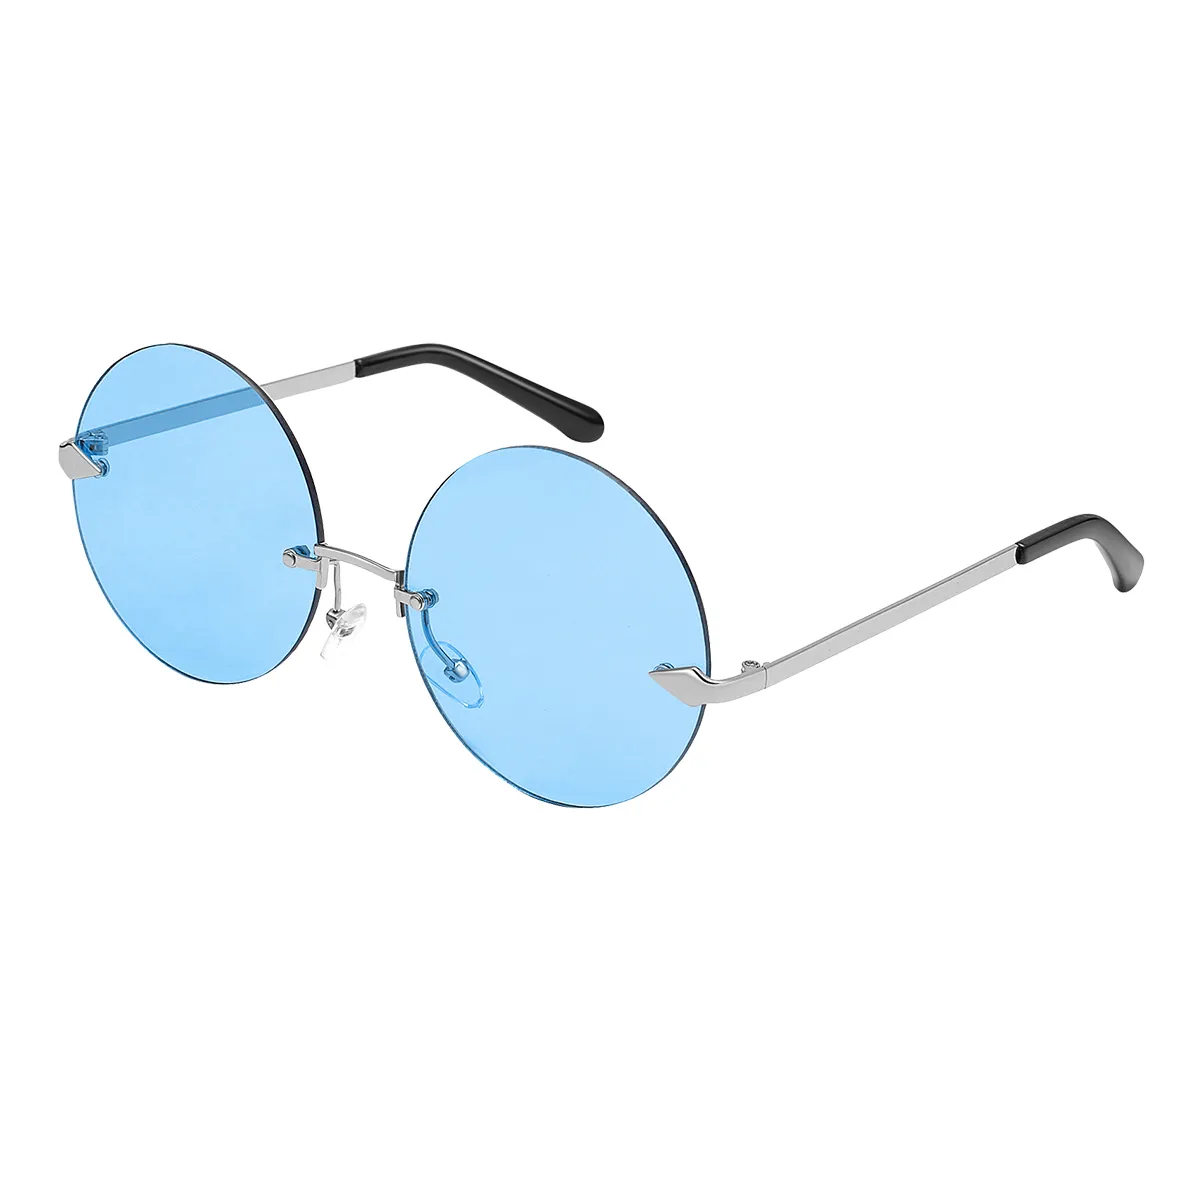 Gaines - Round Blue Sunglasses for Women